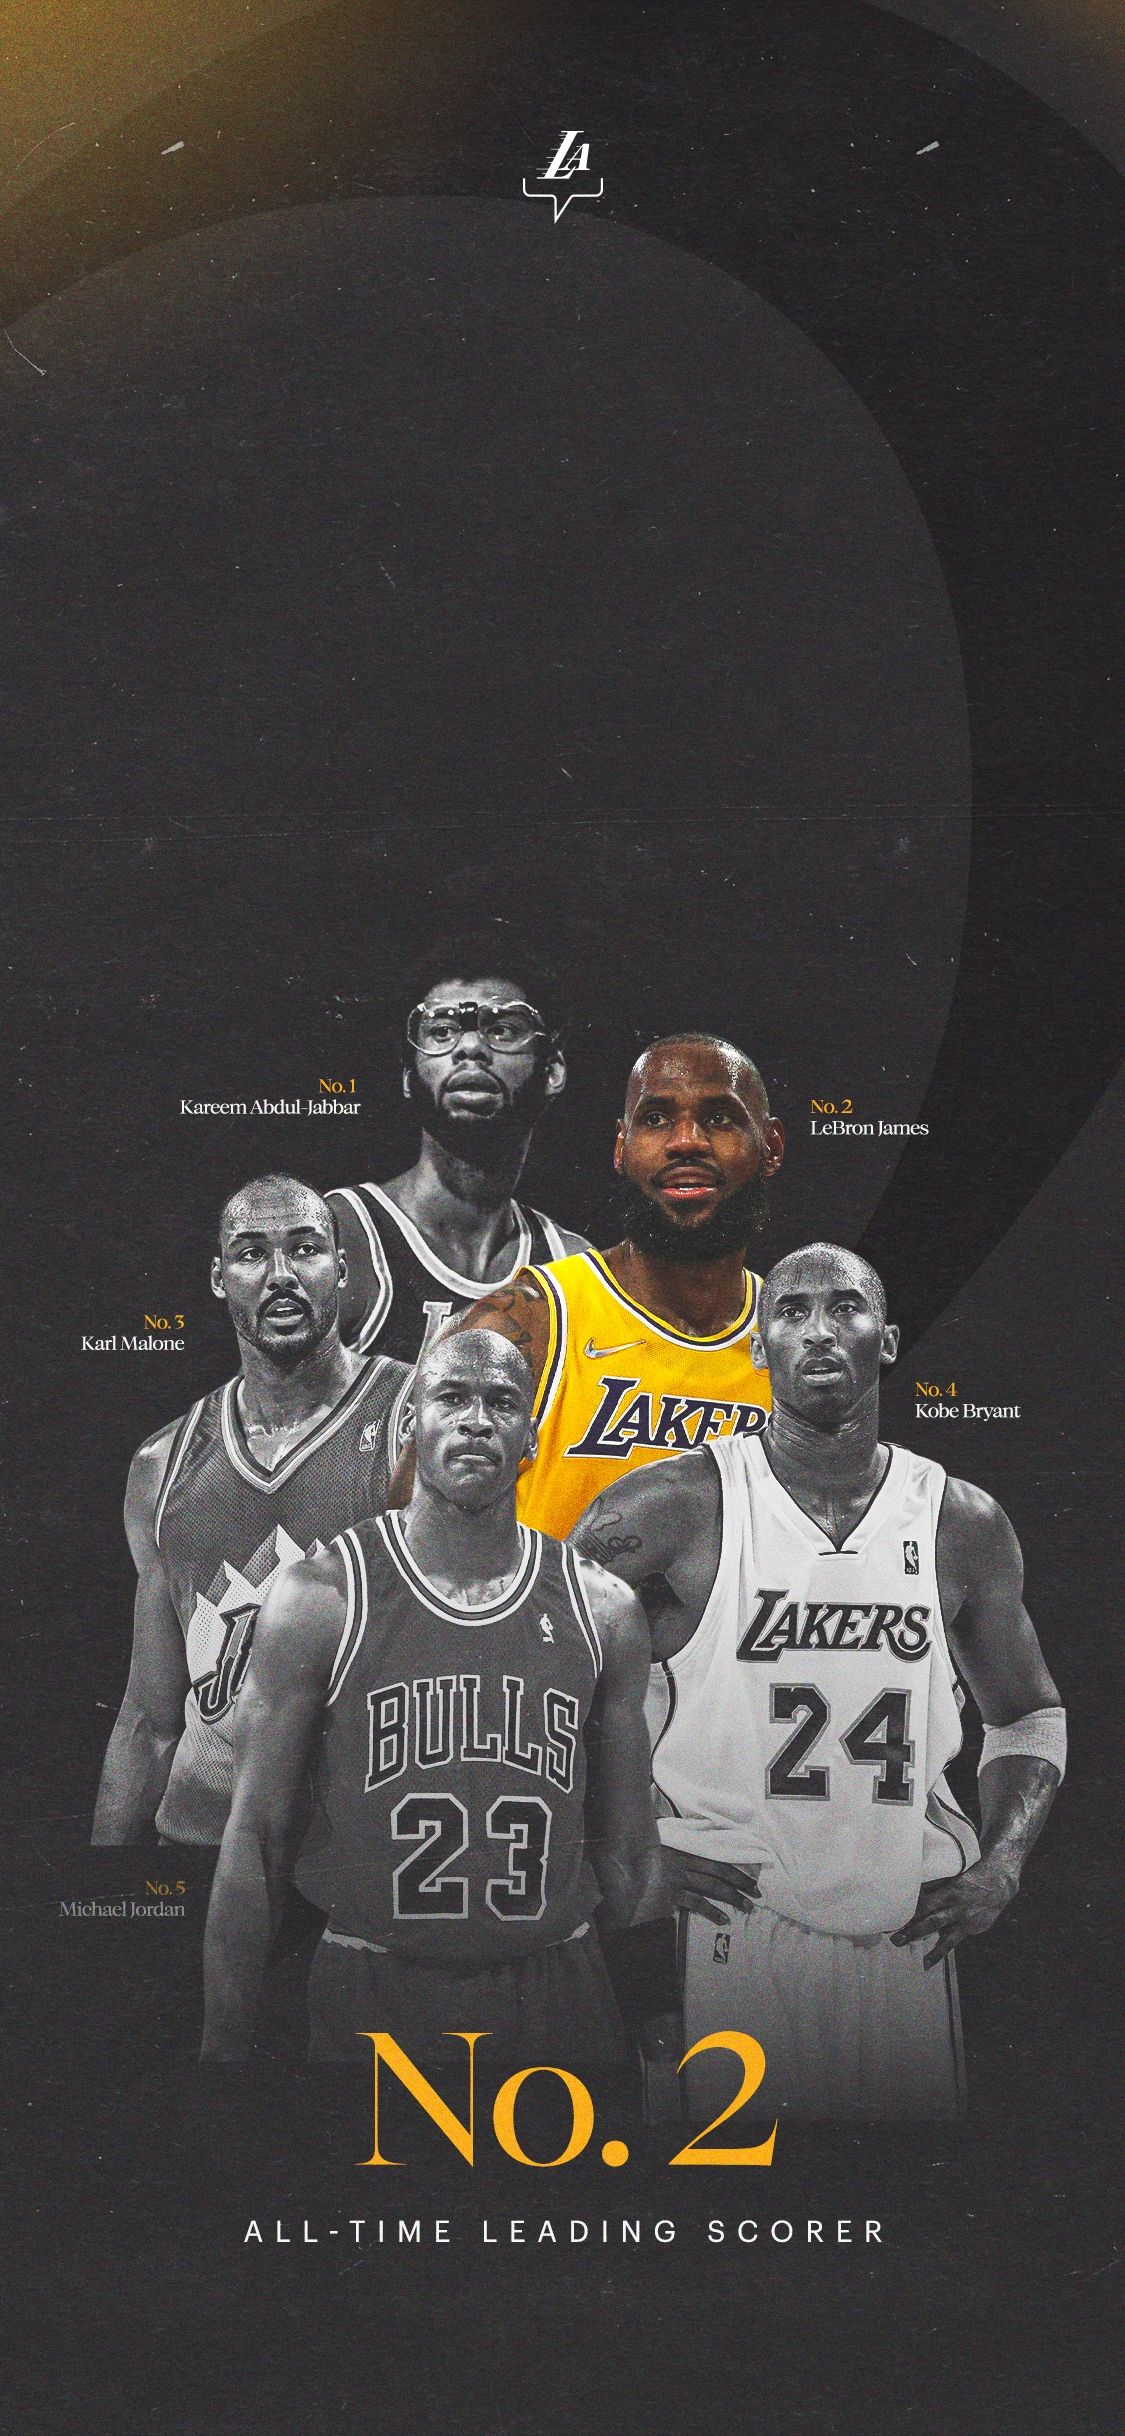 A poster of the lakers basketball team - NBA